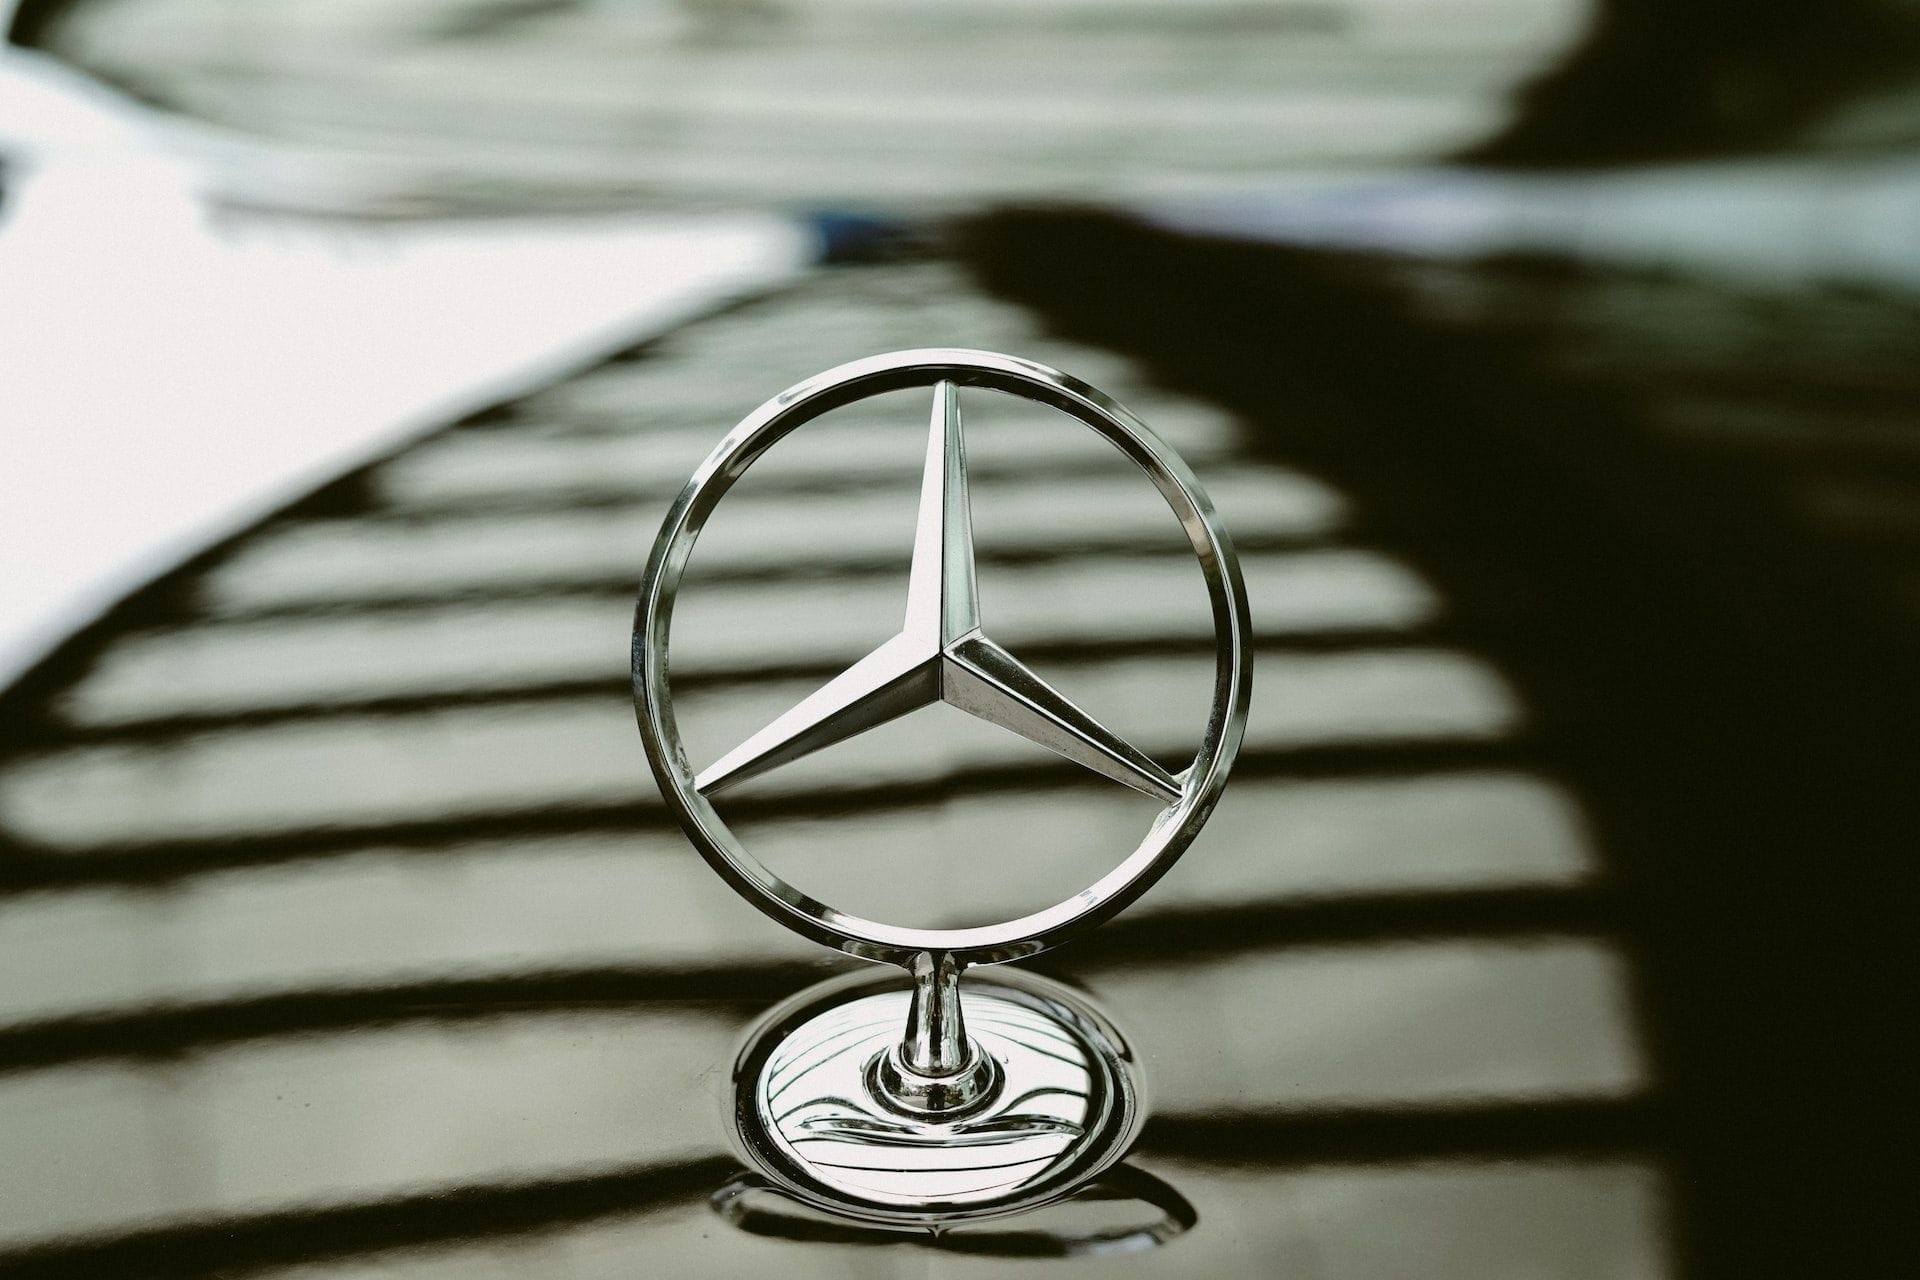 Australian law firm launches its own ‘dieselgate’ class action on behalf of Mercedes-Benz owners